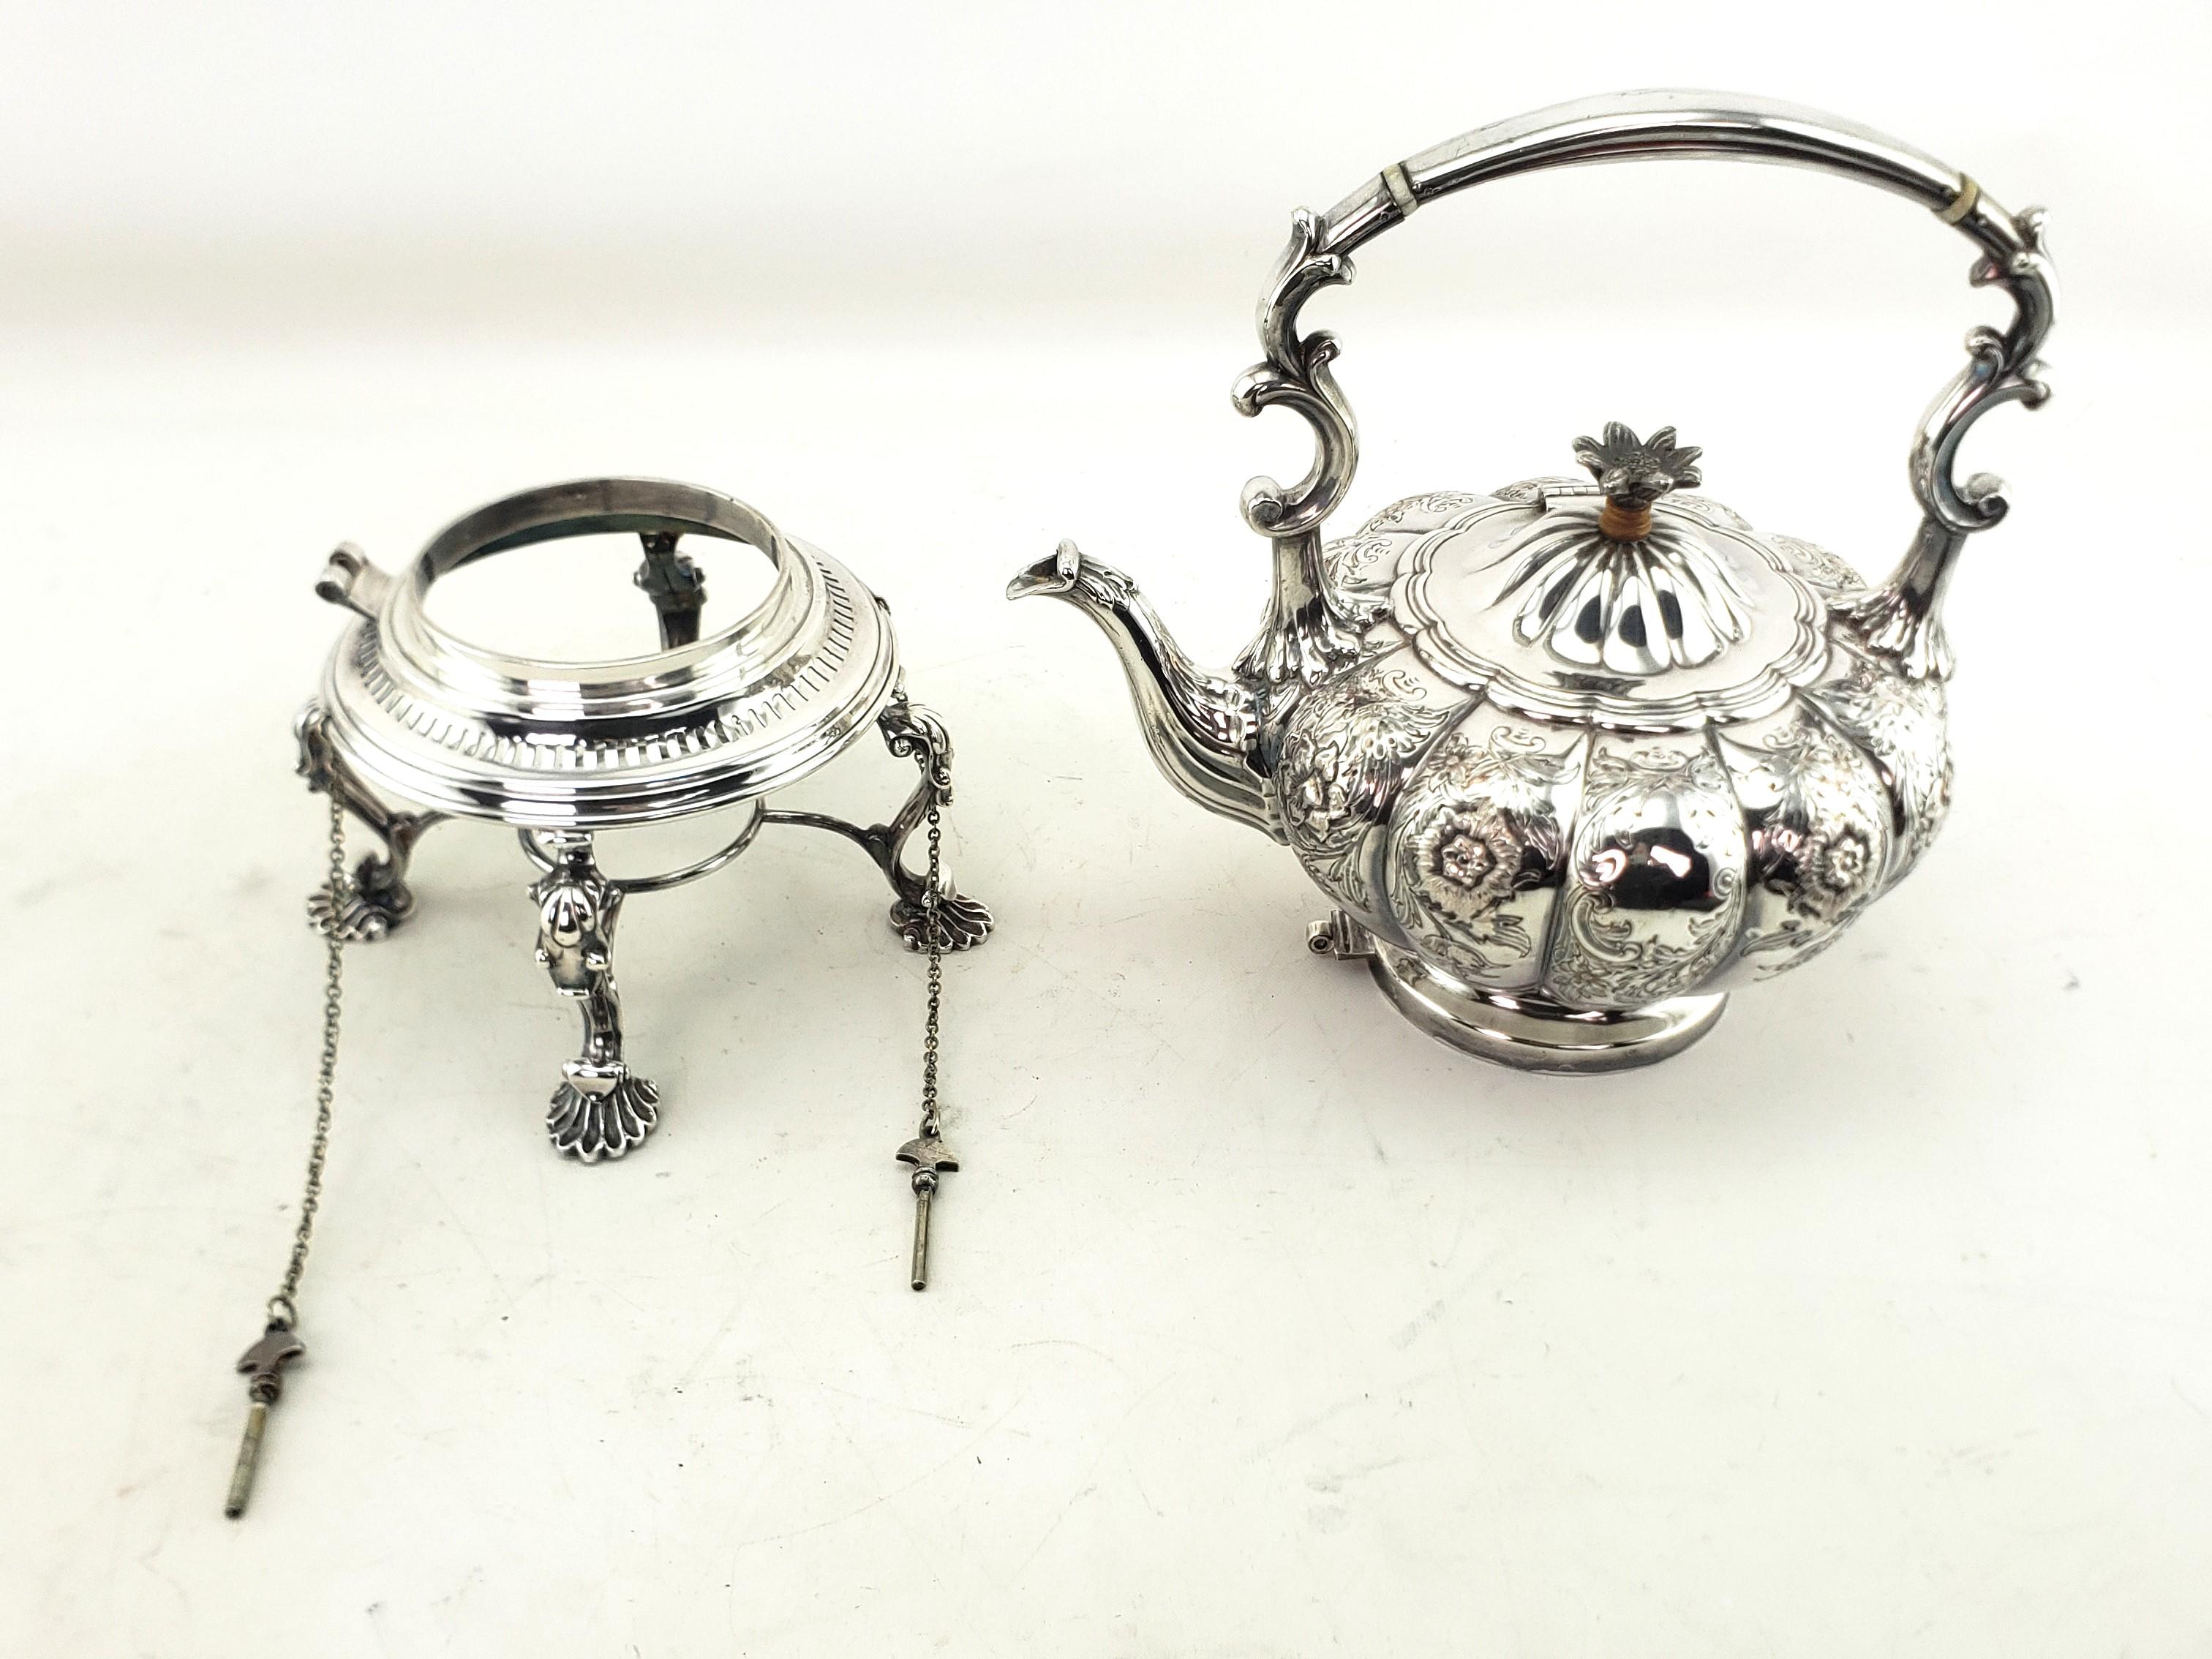 19th Century Antique English Silver Plated Tipping Hot Water Kettle with Chased Floral Motif For Sale